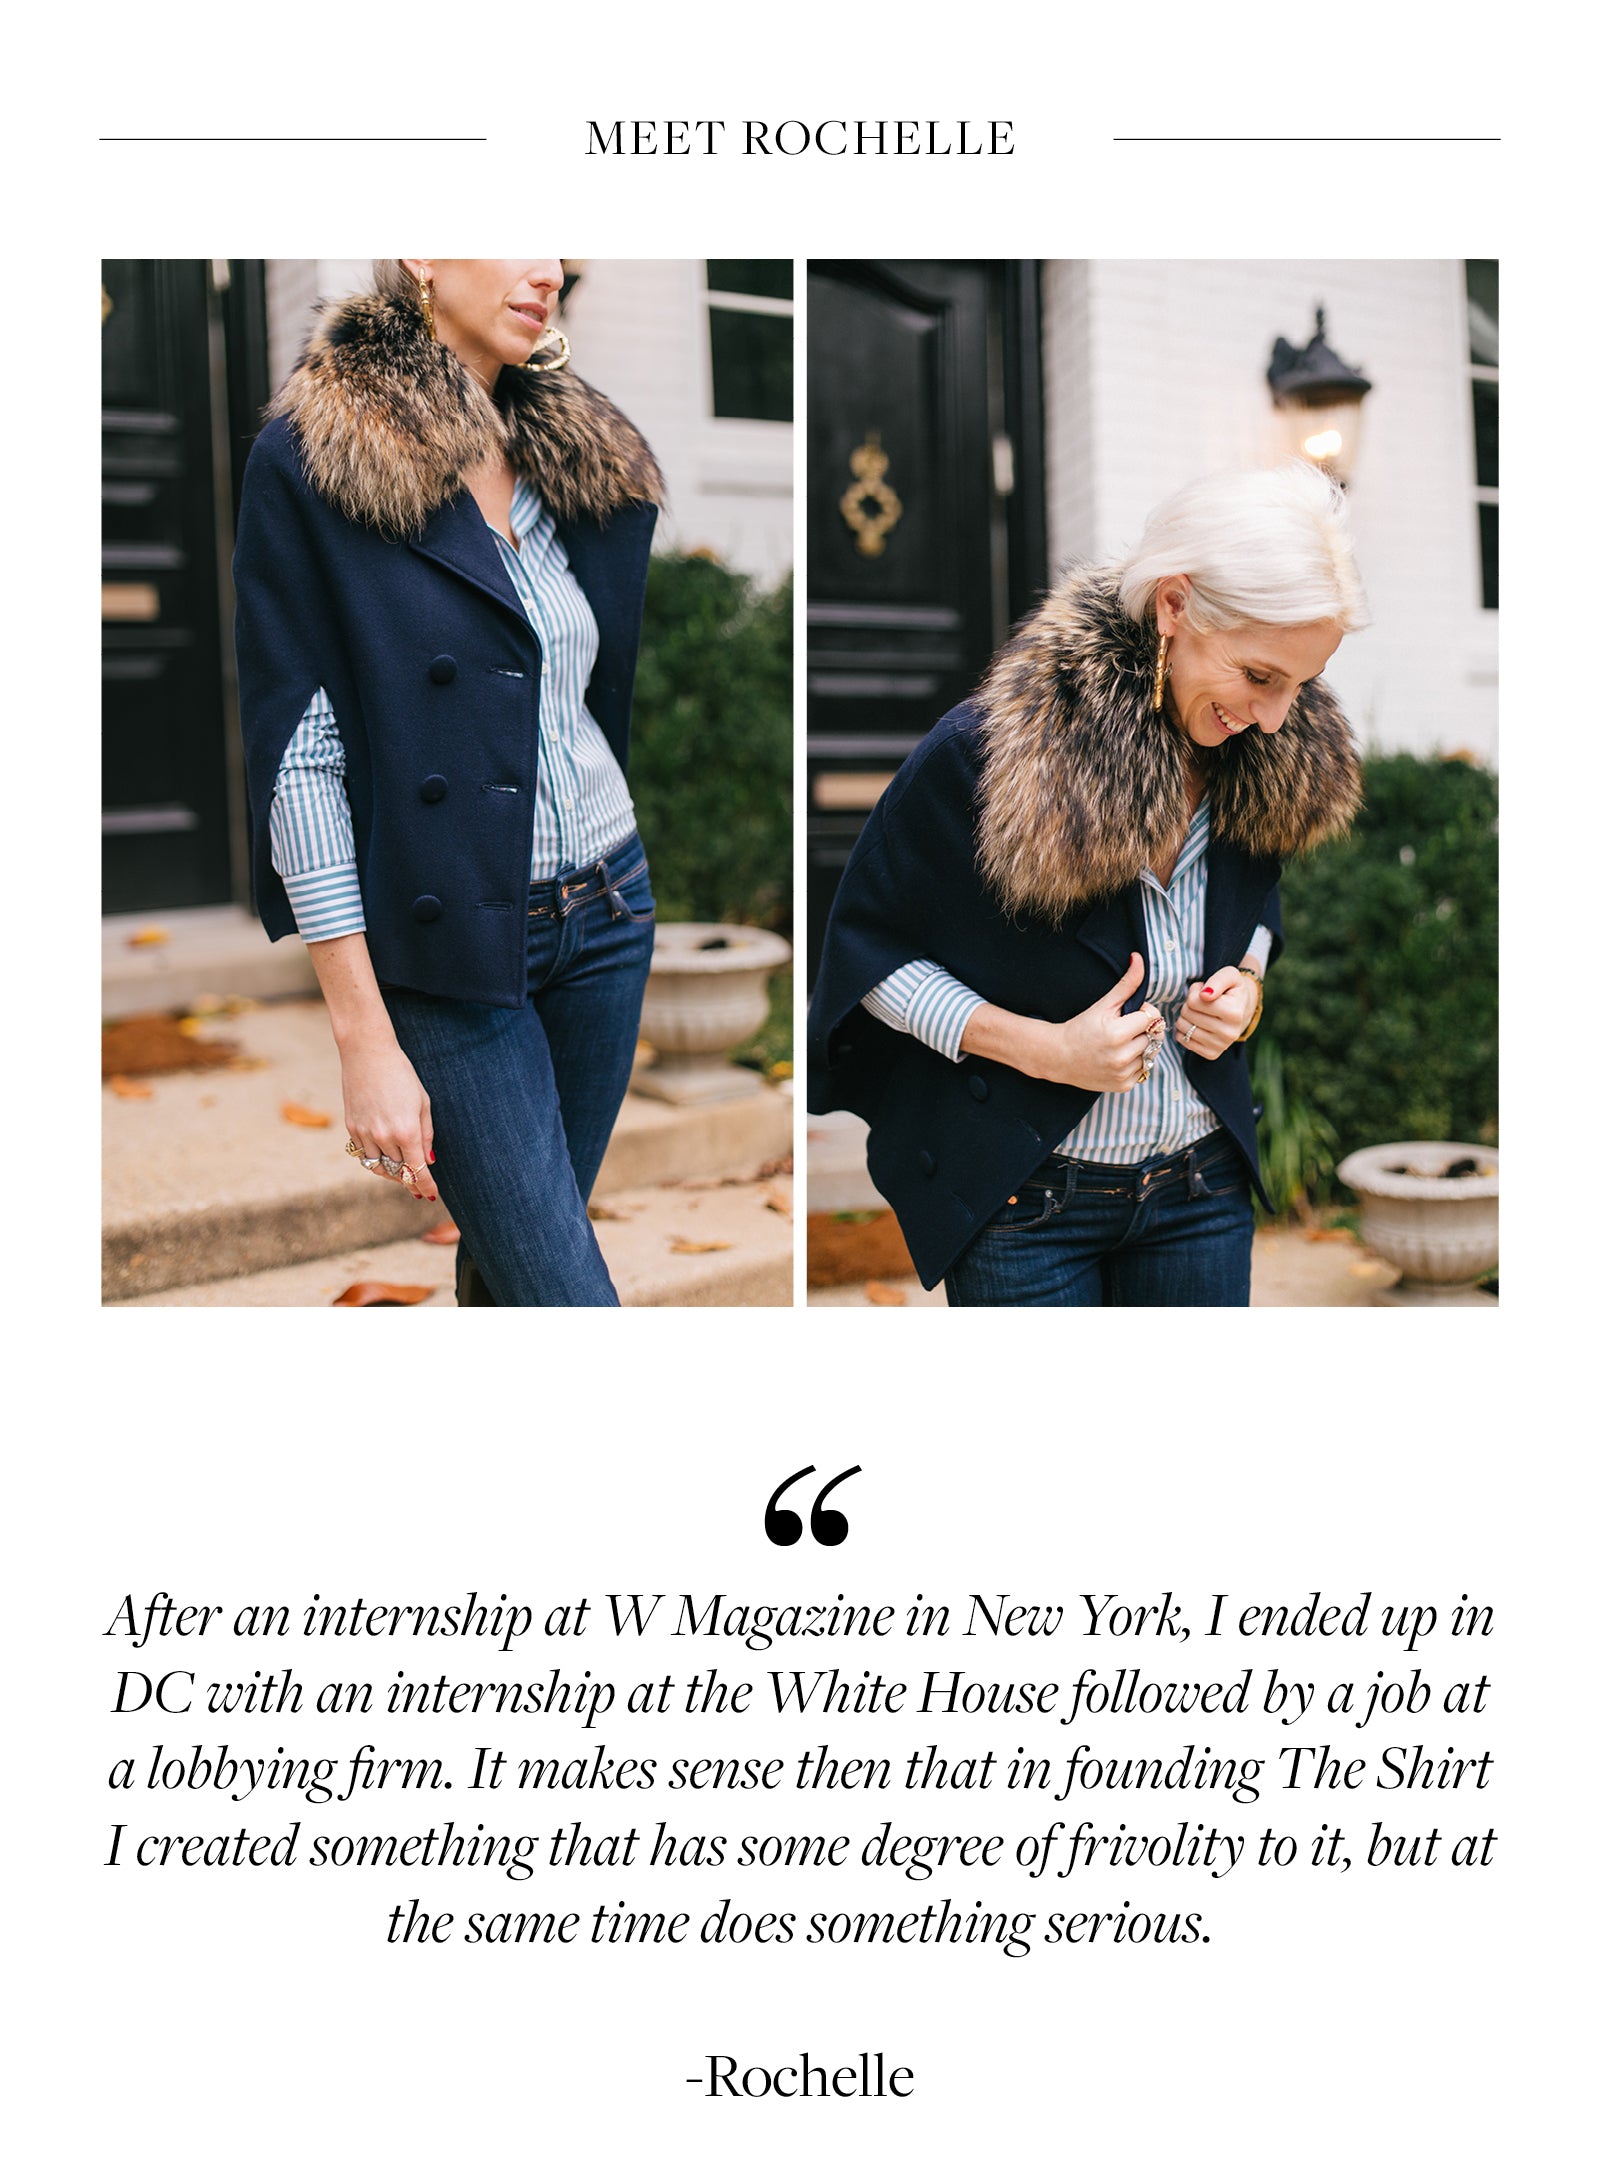 After an internship at W Magazine in New York, I ended up in DC with an internship at the White House followed by a job at a lobbying firm. It makes sense then that in founding The Shirt I created something that has some degree of frivolity to it, but at the same time does something serious.  -Rochelle